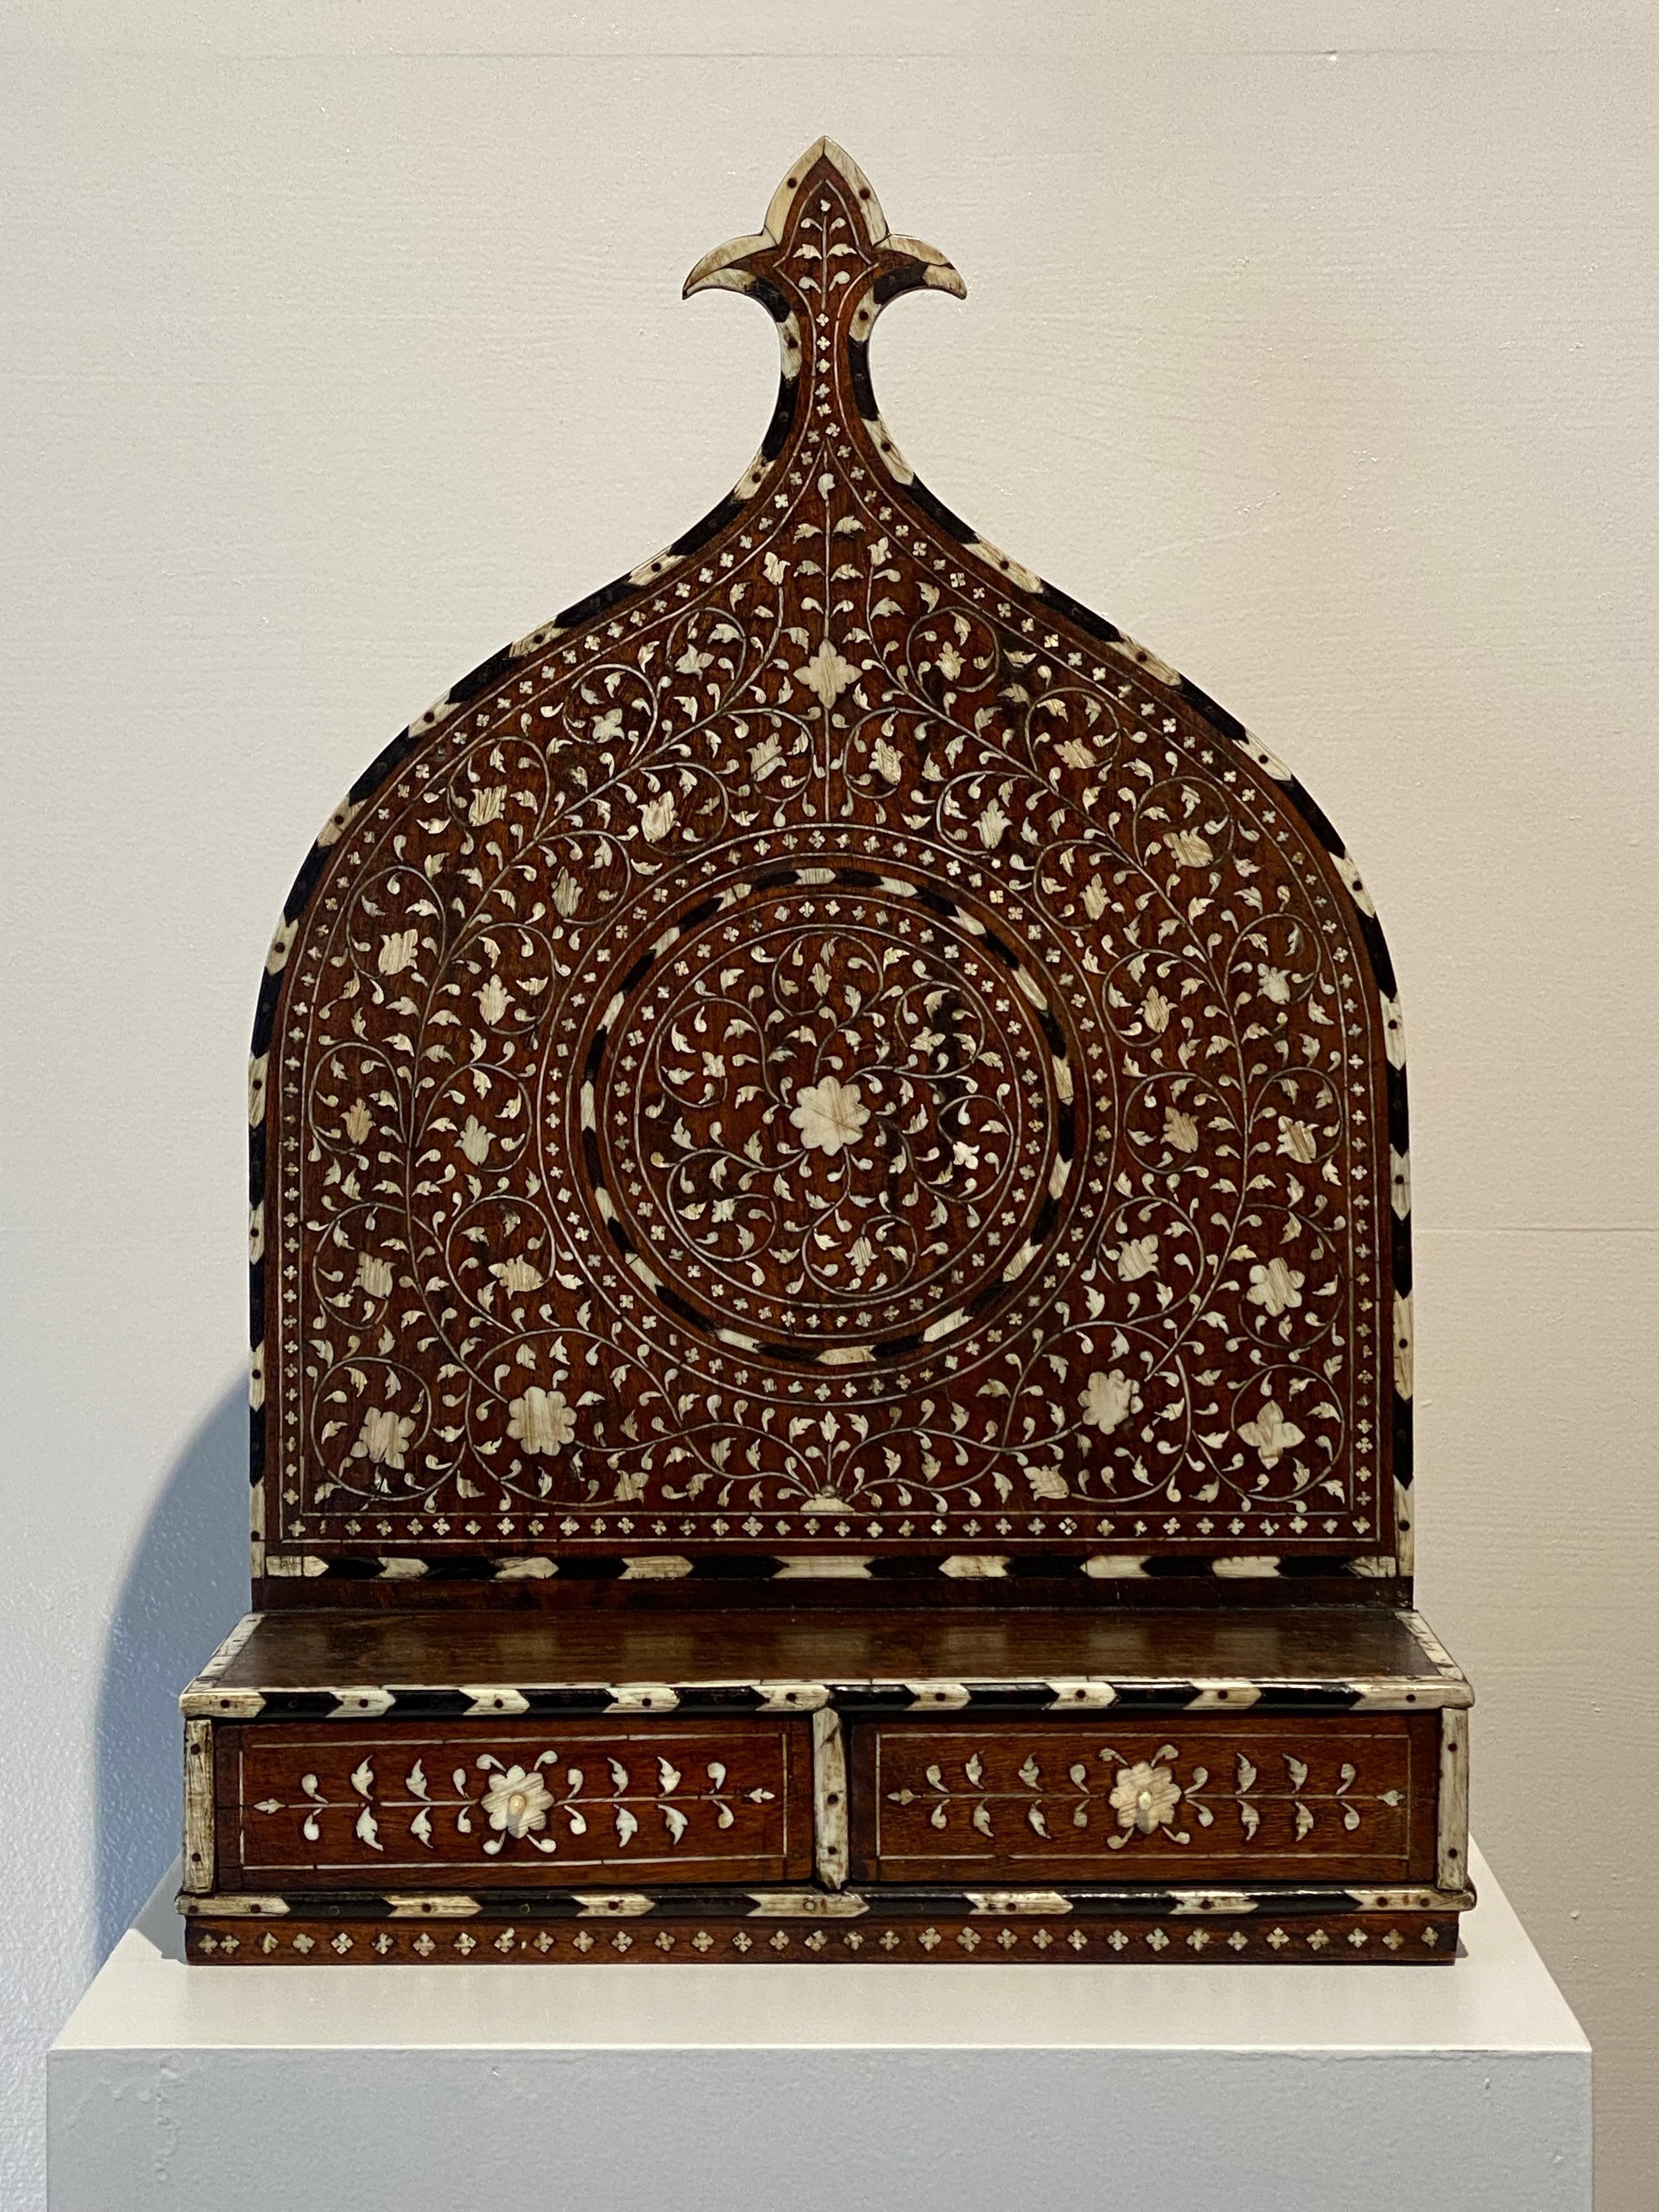 Antique and rare Anglo-indian Display Object with 2 small drawers,
the object has the typical anglo-Indian decorations and design,
good old patina of the wood and Mother of Pearl and bone inlay,
very decorative object to be integrated in your